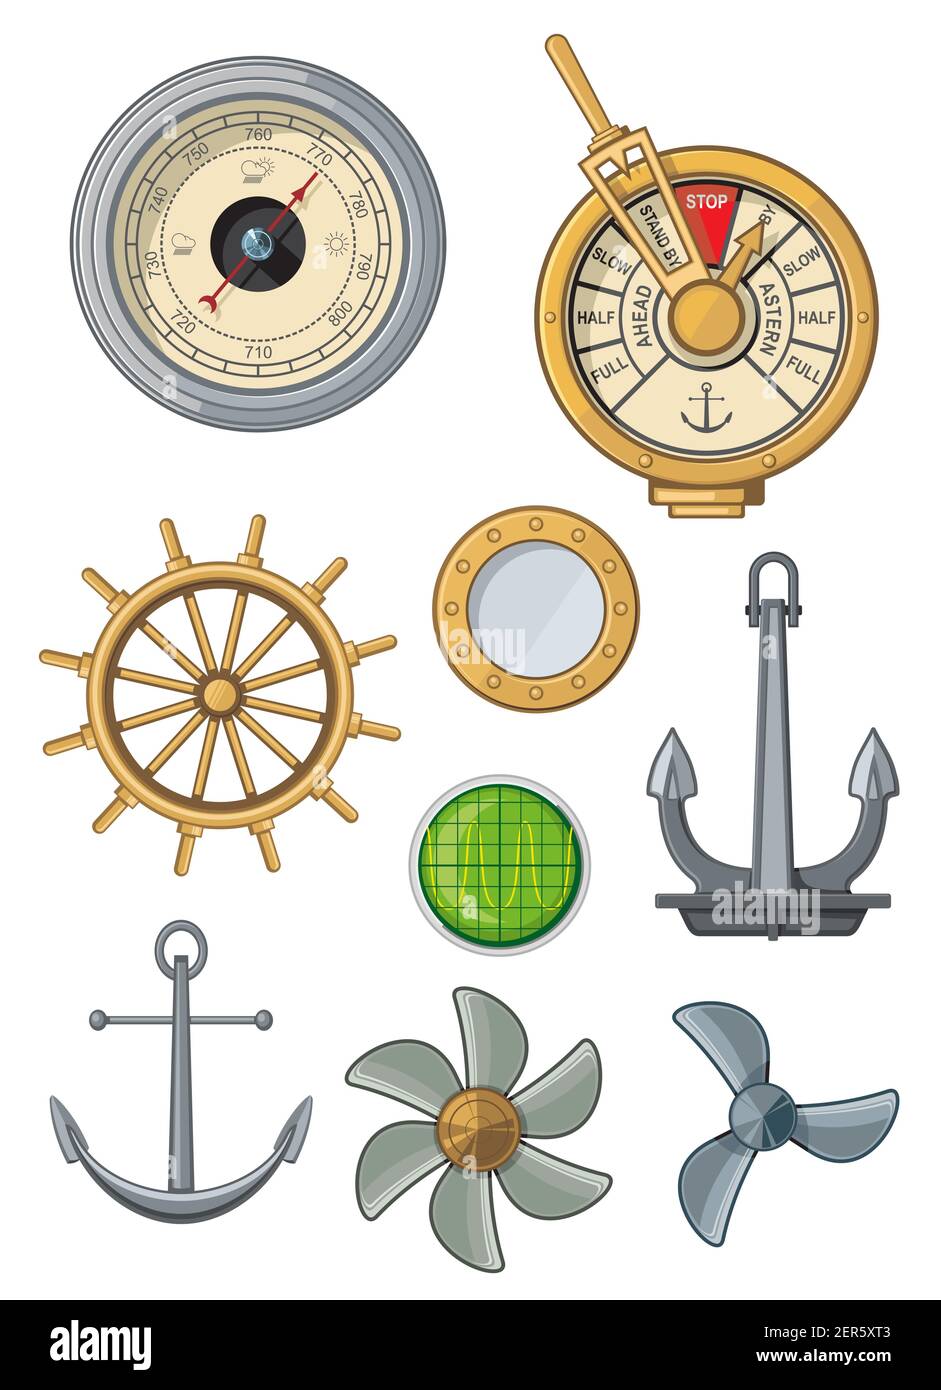 Marine and nautical ship icons of anchor, sailing and seafaring flat vector symbols. Nautical equipment, compass, ship helm steering wheel, engine pro Stock Vector